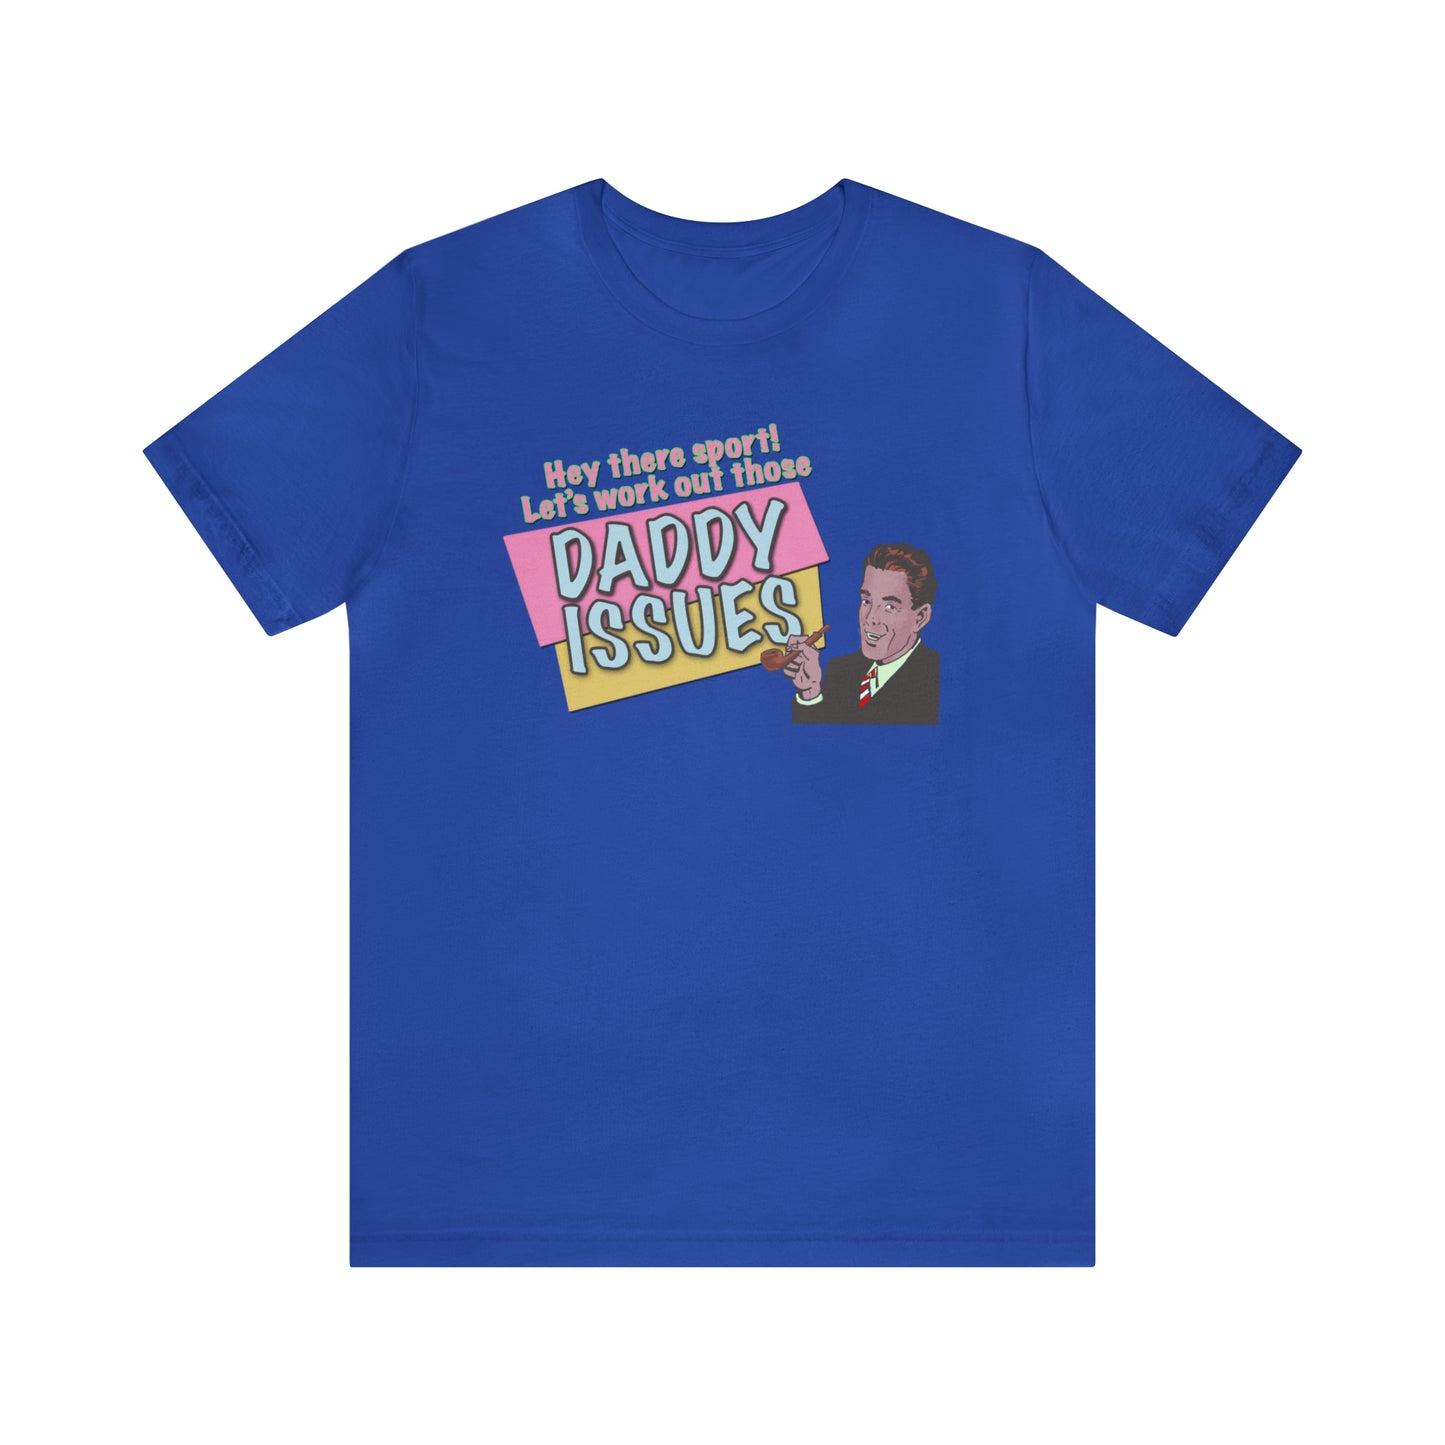 Daddy Issues T-Shirt